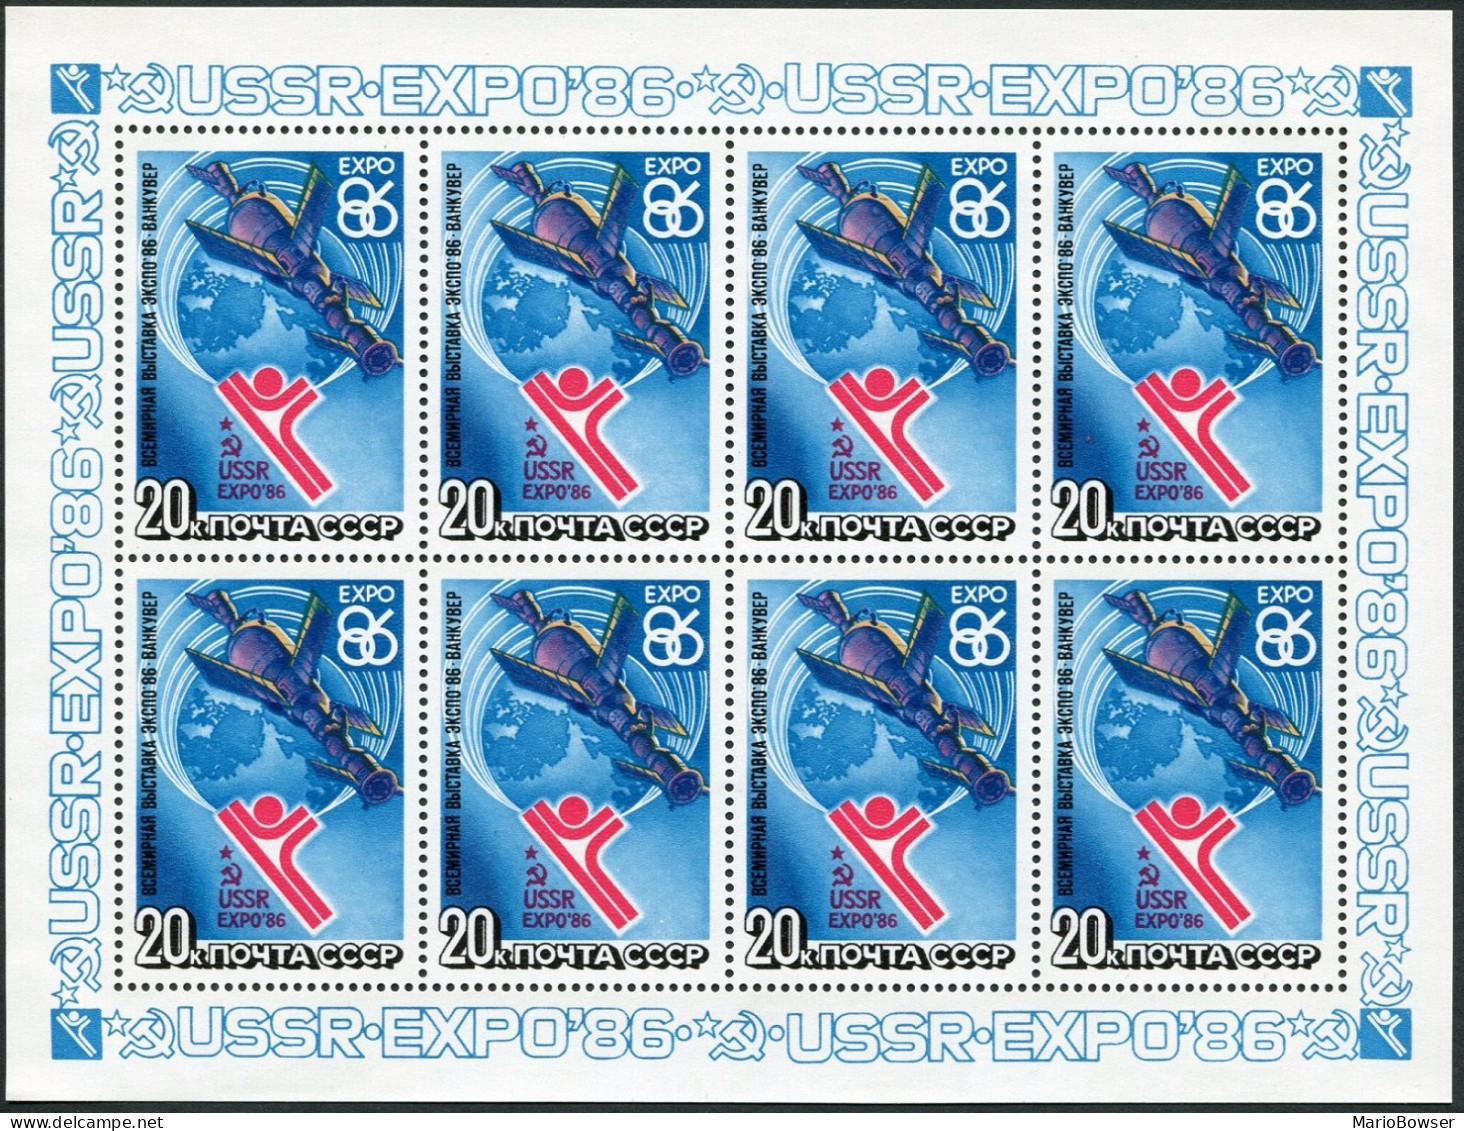 Russia 5440a Sheet, MNH. Michel 5589 Klb. EXPO-1986, Vancouver. Space Station. - Ungebraucht